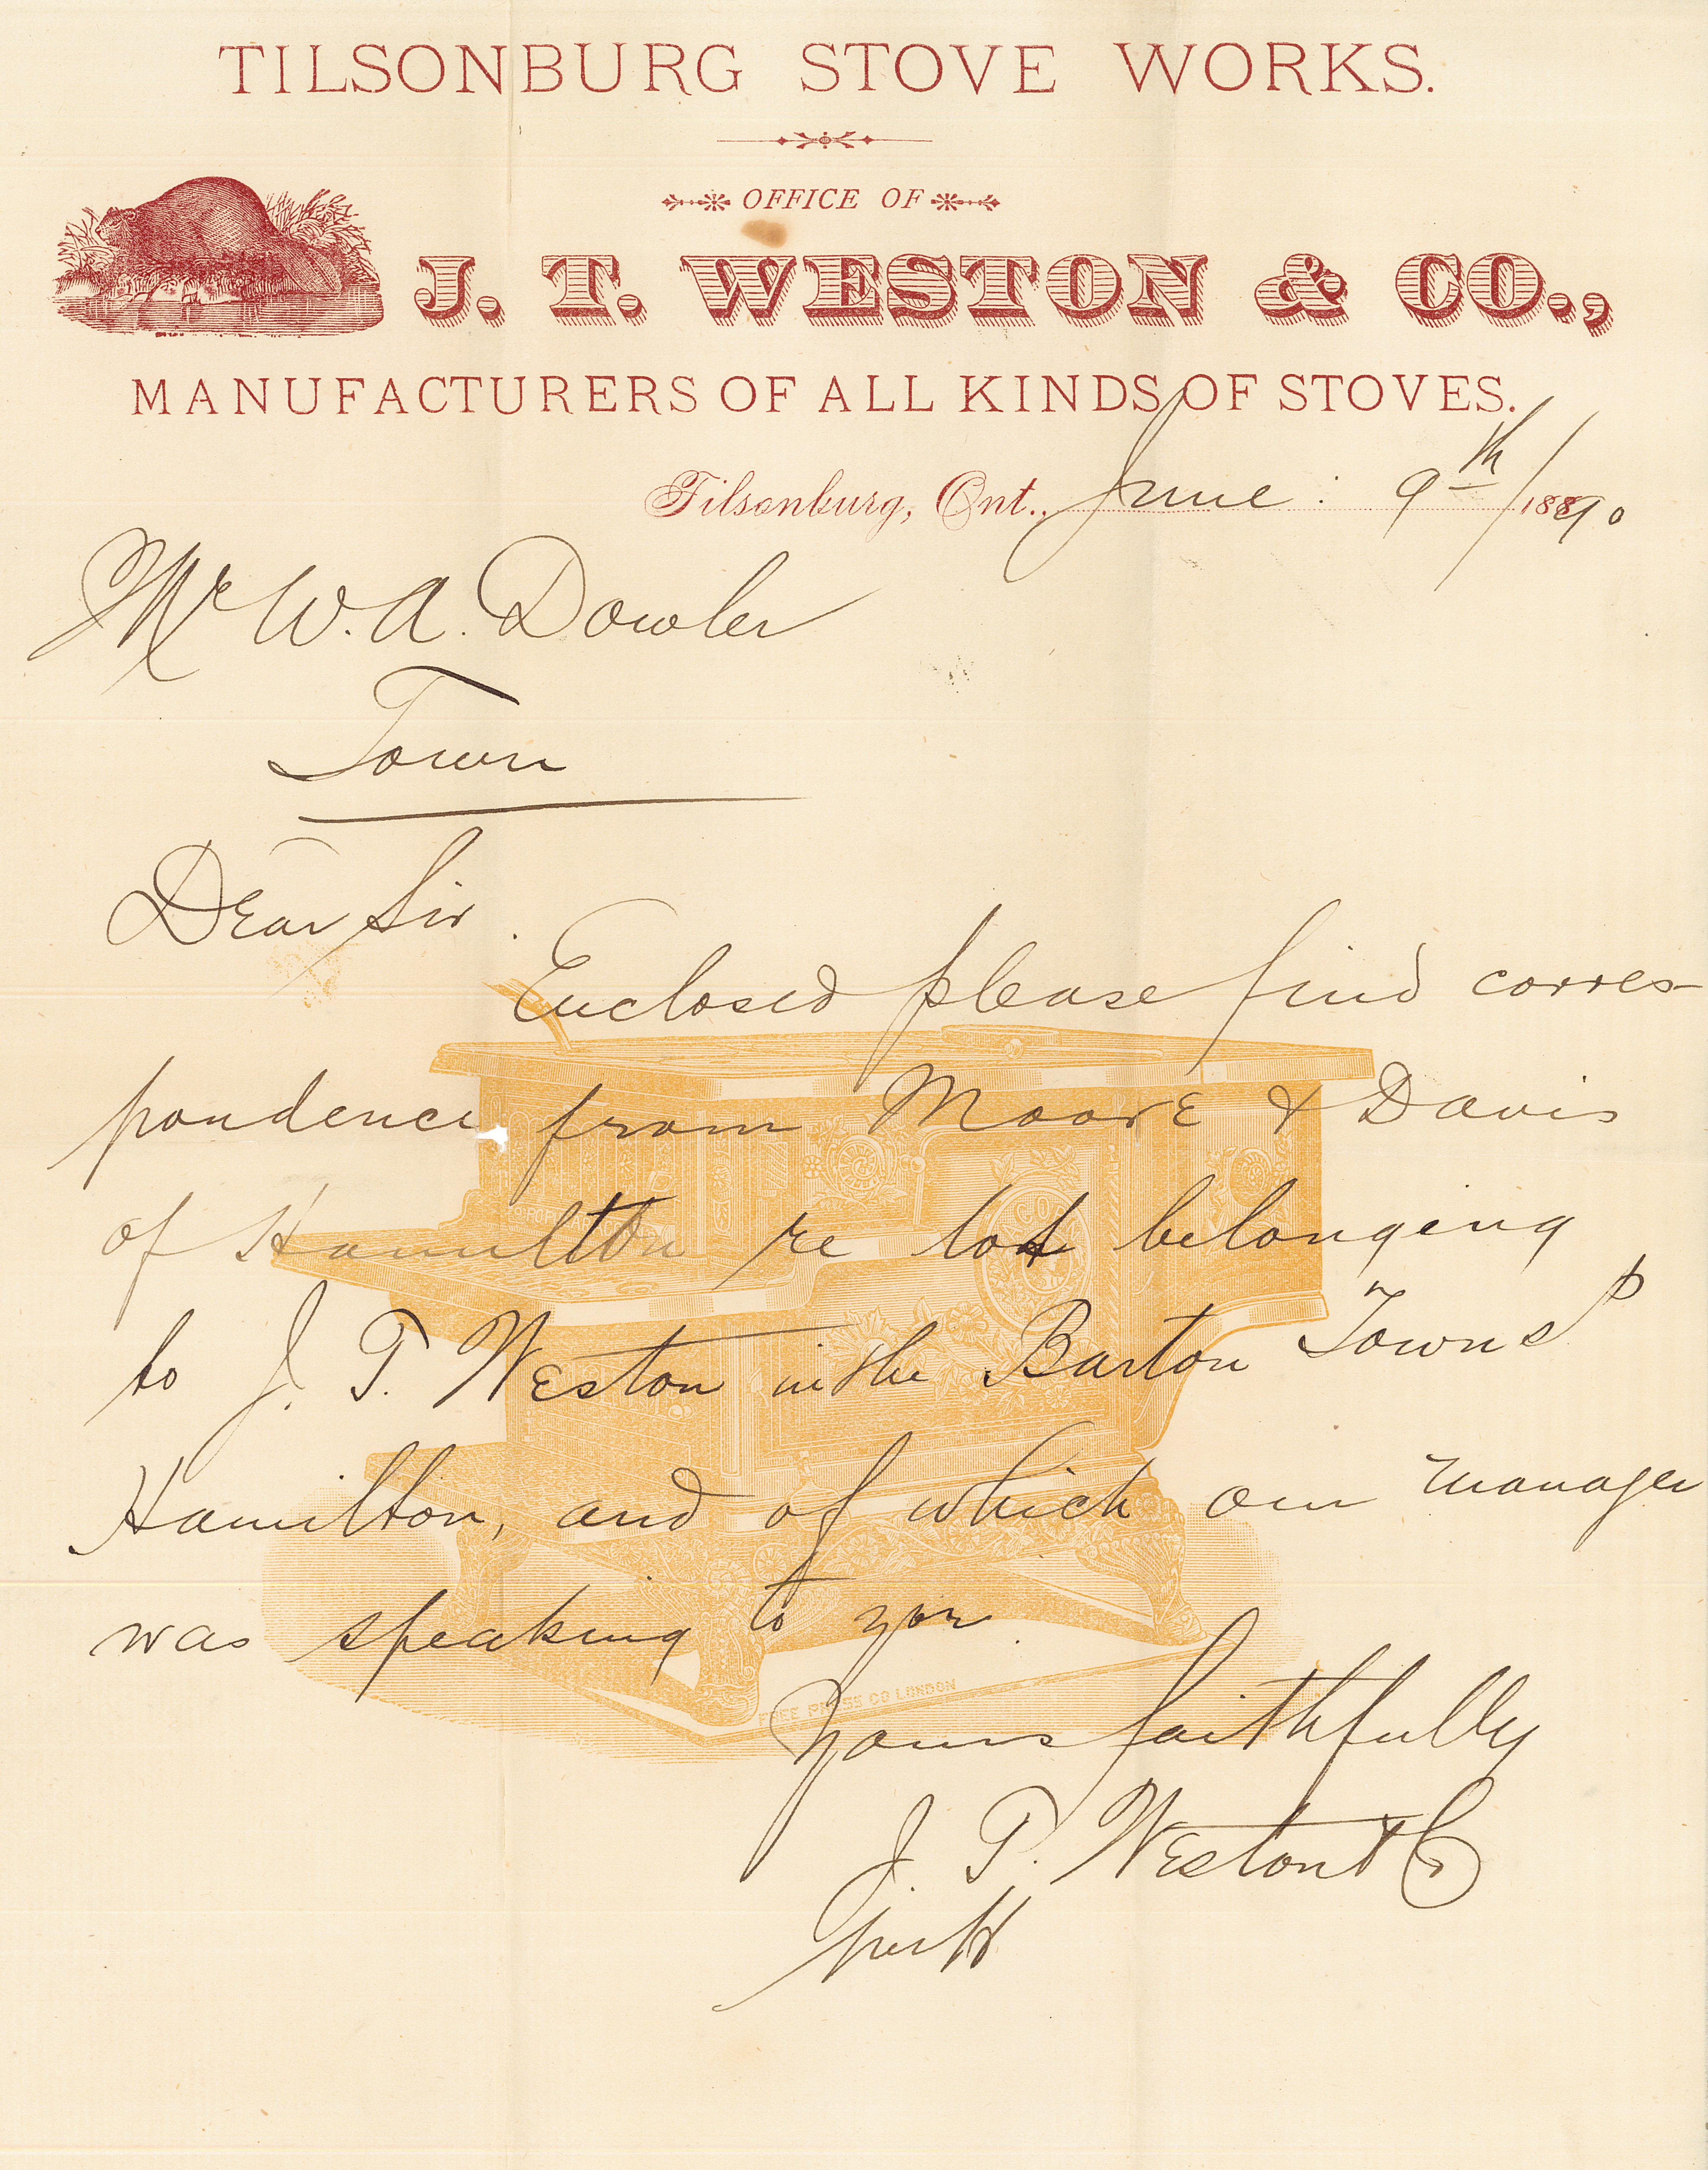 Letterhead from J.T. Weston & Co. Letterhead features a picture of a beaver and a stove.